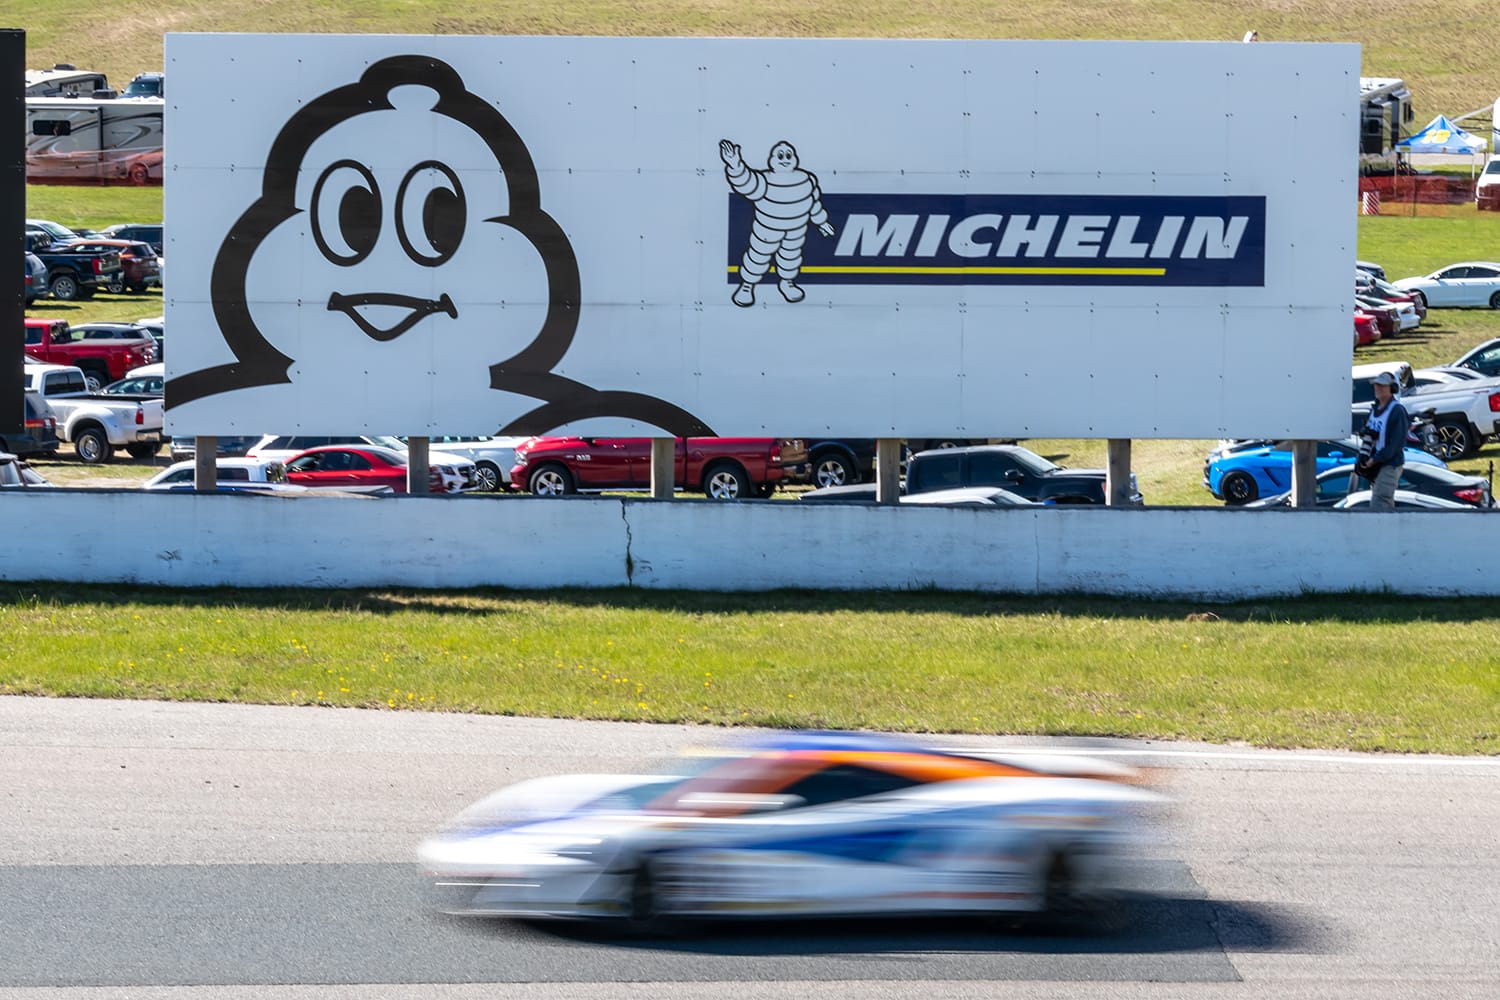 Michelin Tire billboard at Canadian Tire Motorsport Park as McLaren 720S speeds by on-track during a race. Bowmanville, Canada